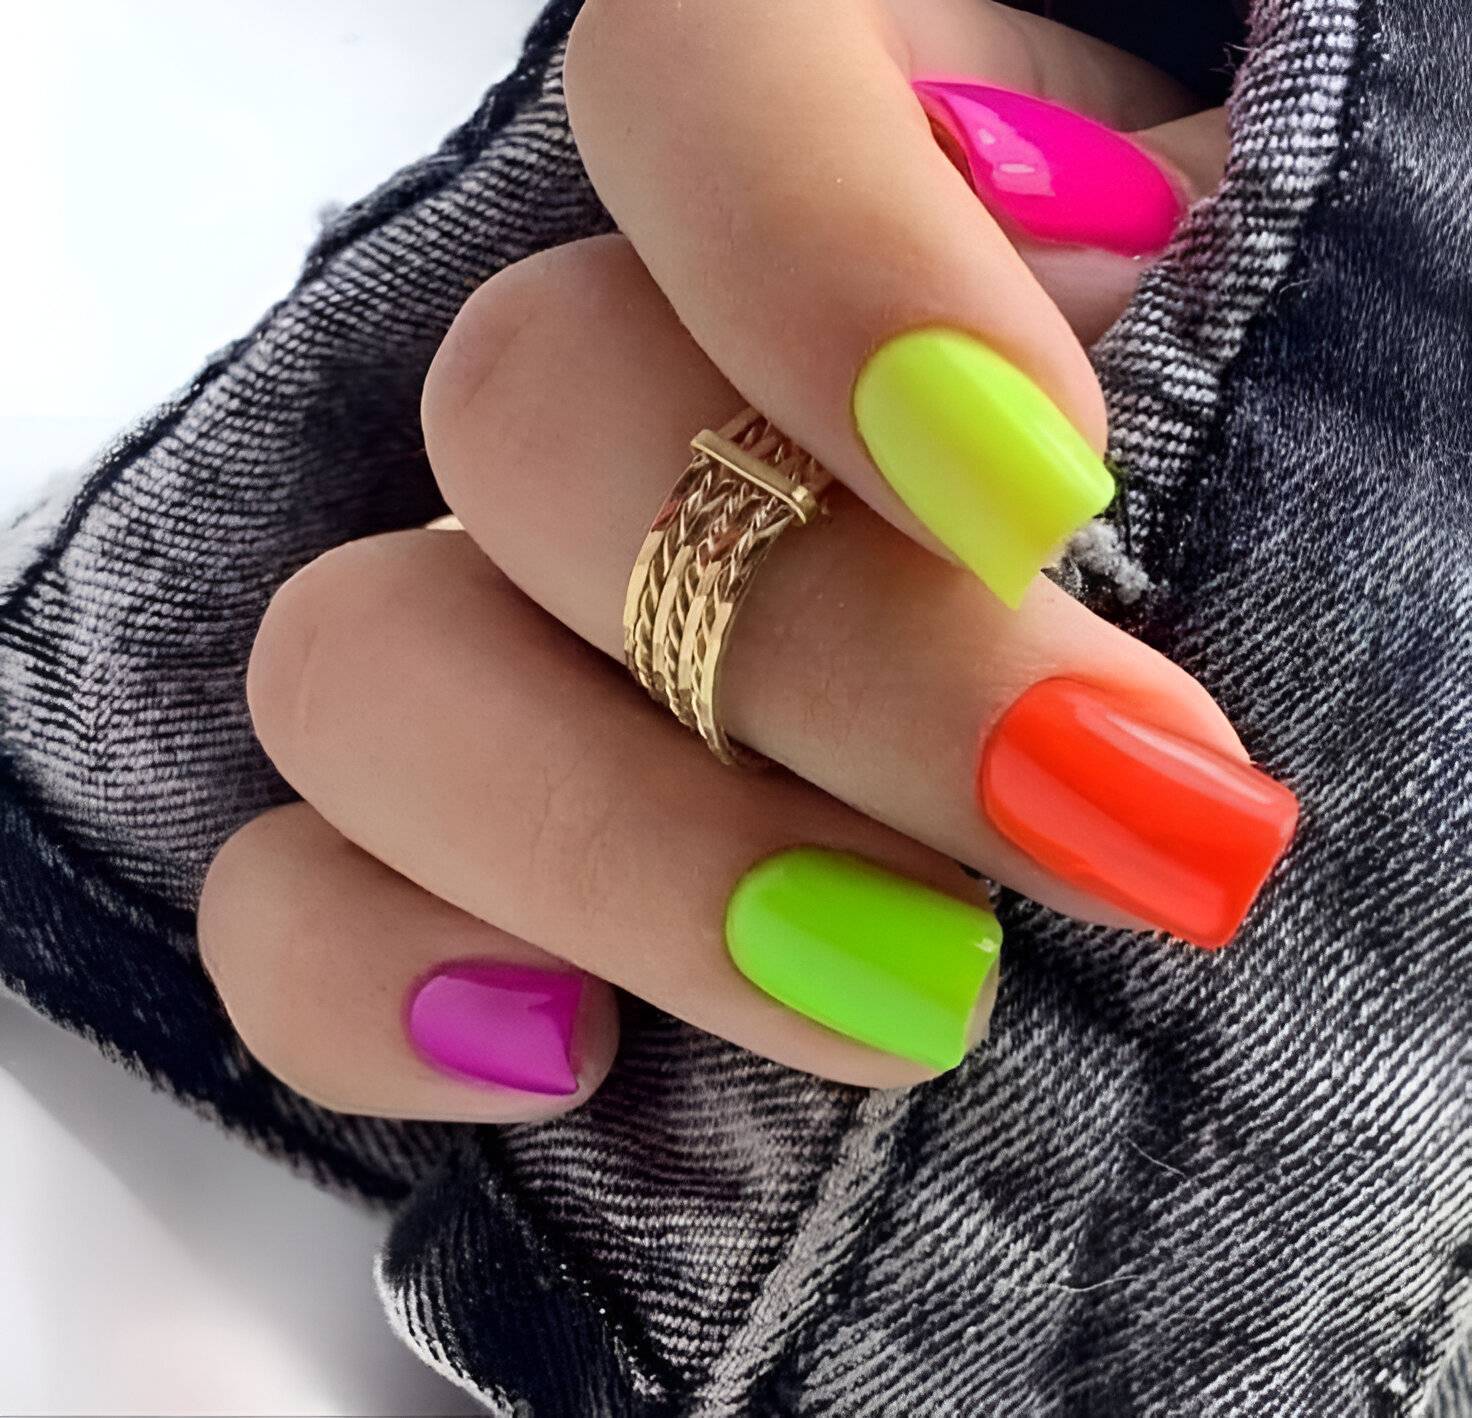 30 Colorful Nail Art Designs To Have Fun And Stay Fabulous - 239